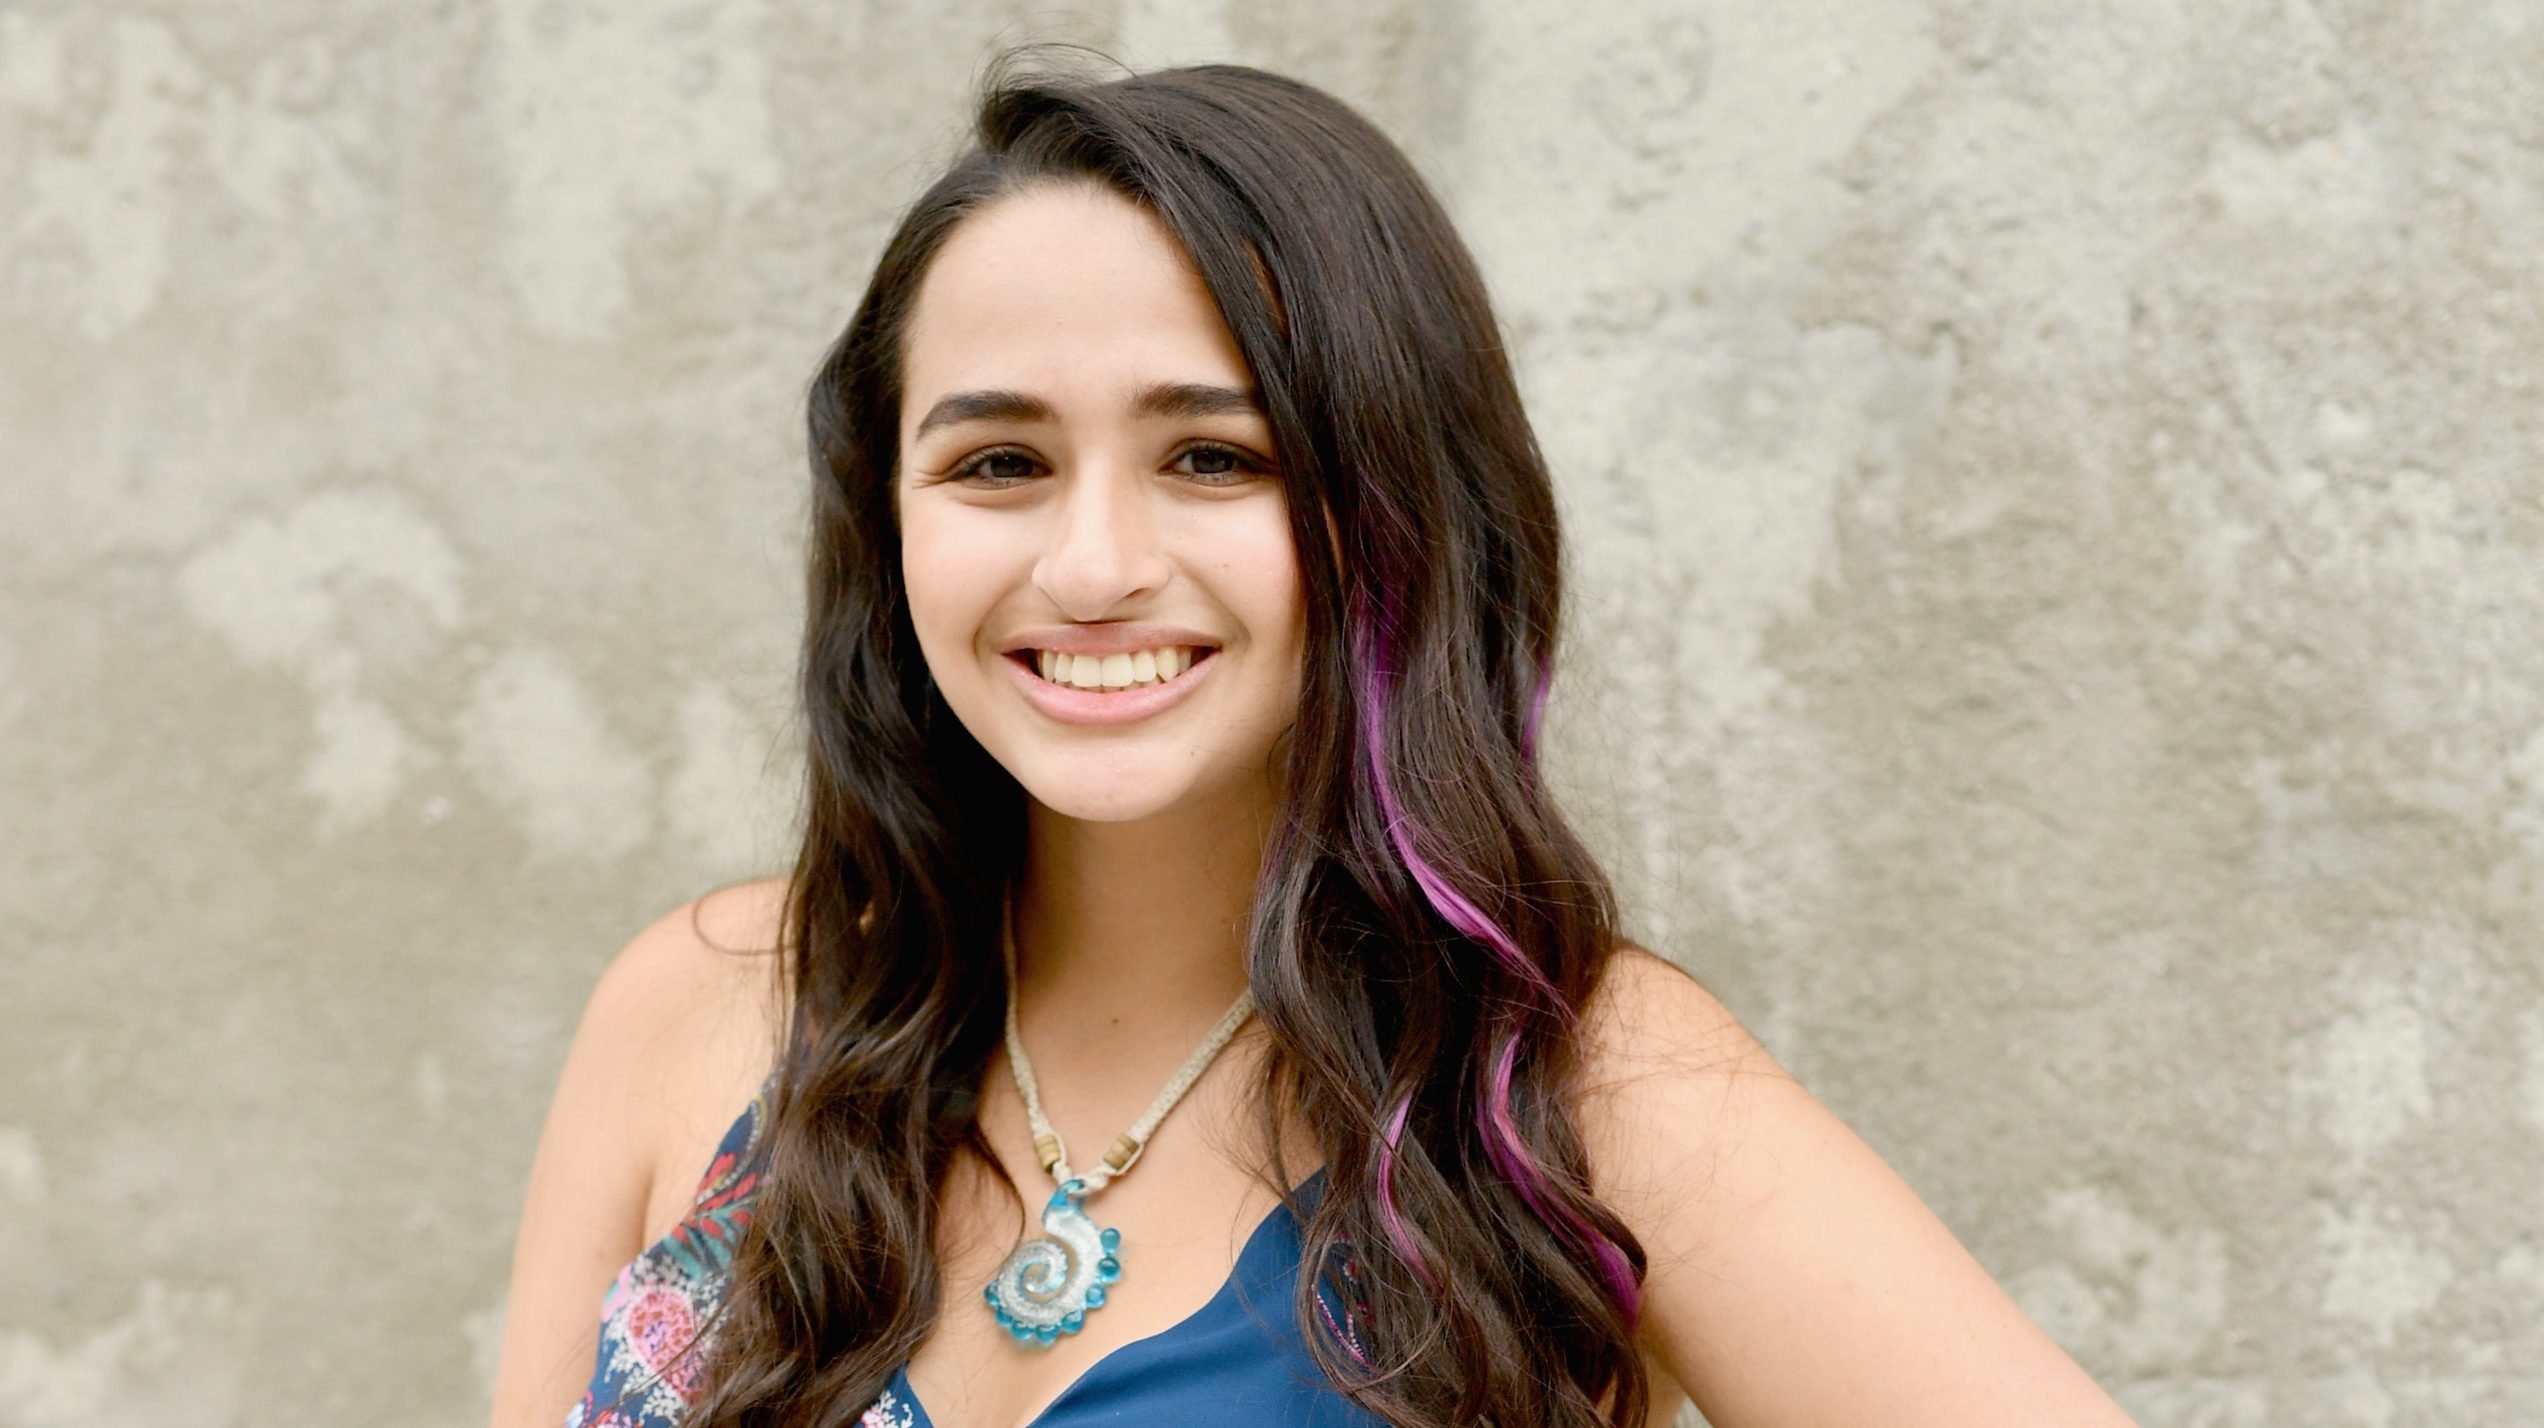 What Is Jazz Jennings Real Name